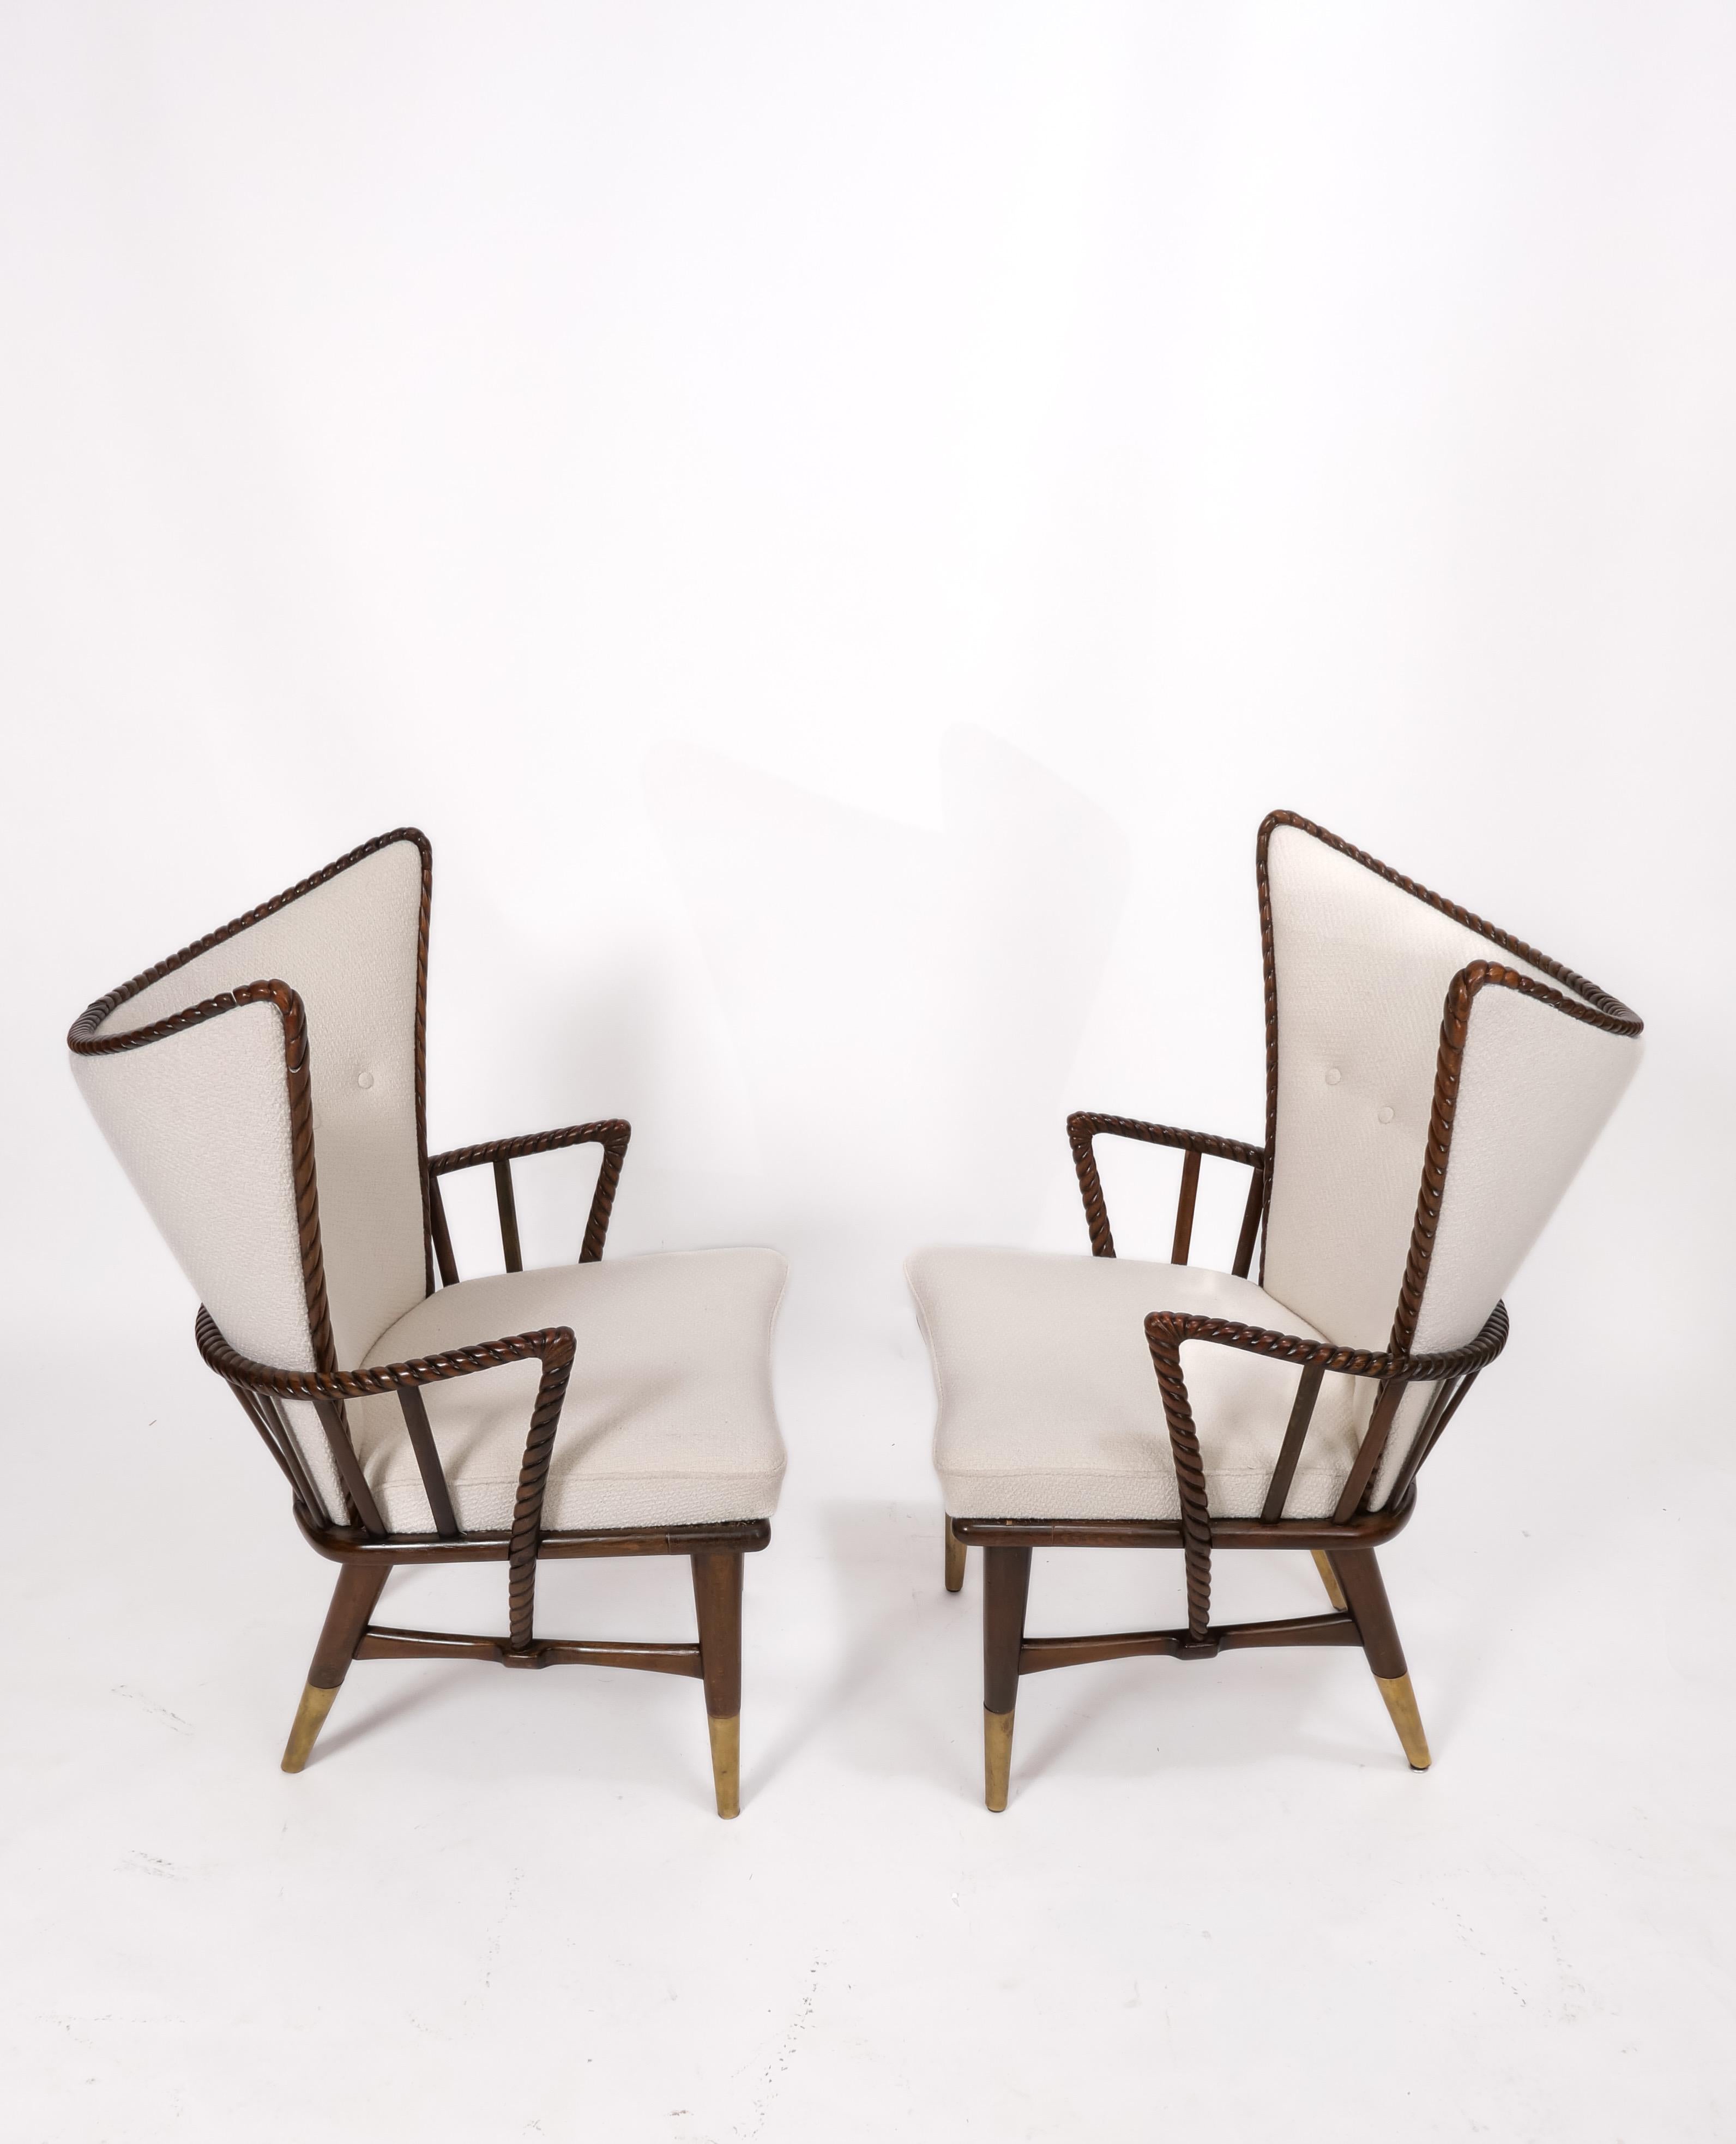 Dramatic winged armchairs feature intricately carved wood frames and brass boots. Maker unknown, recently imported from Europe and fully restored with a slightly nubby-textured ivory woven wool upholstery. Really elegant chairs. Beautiful from any